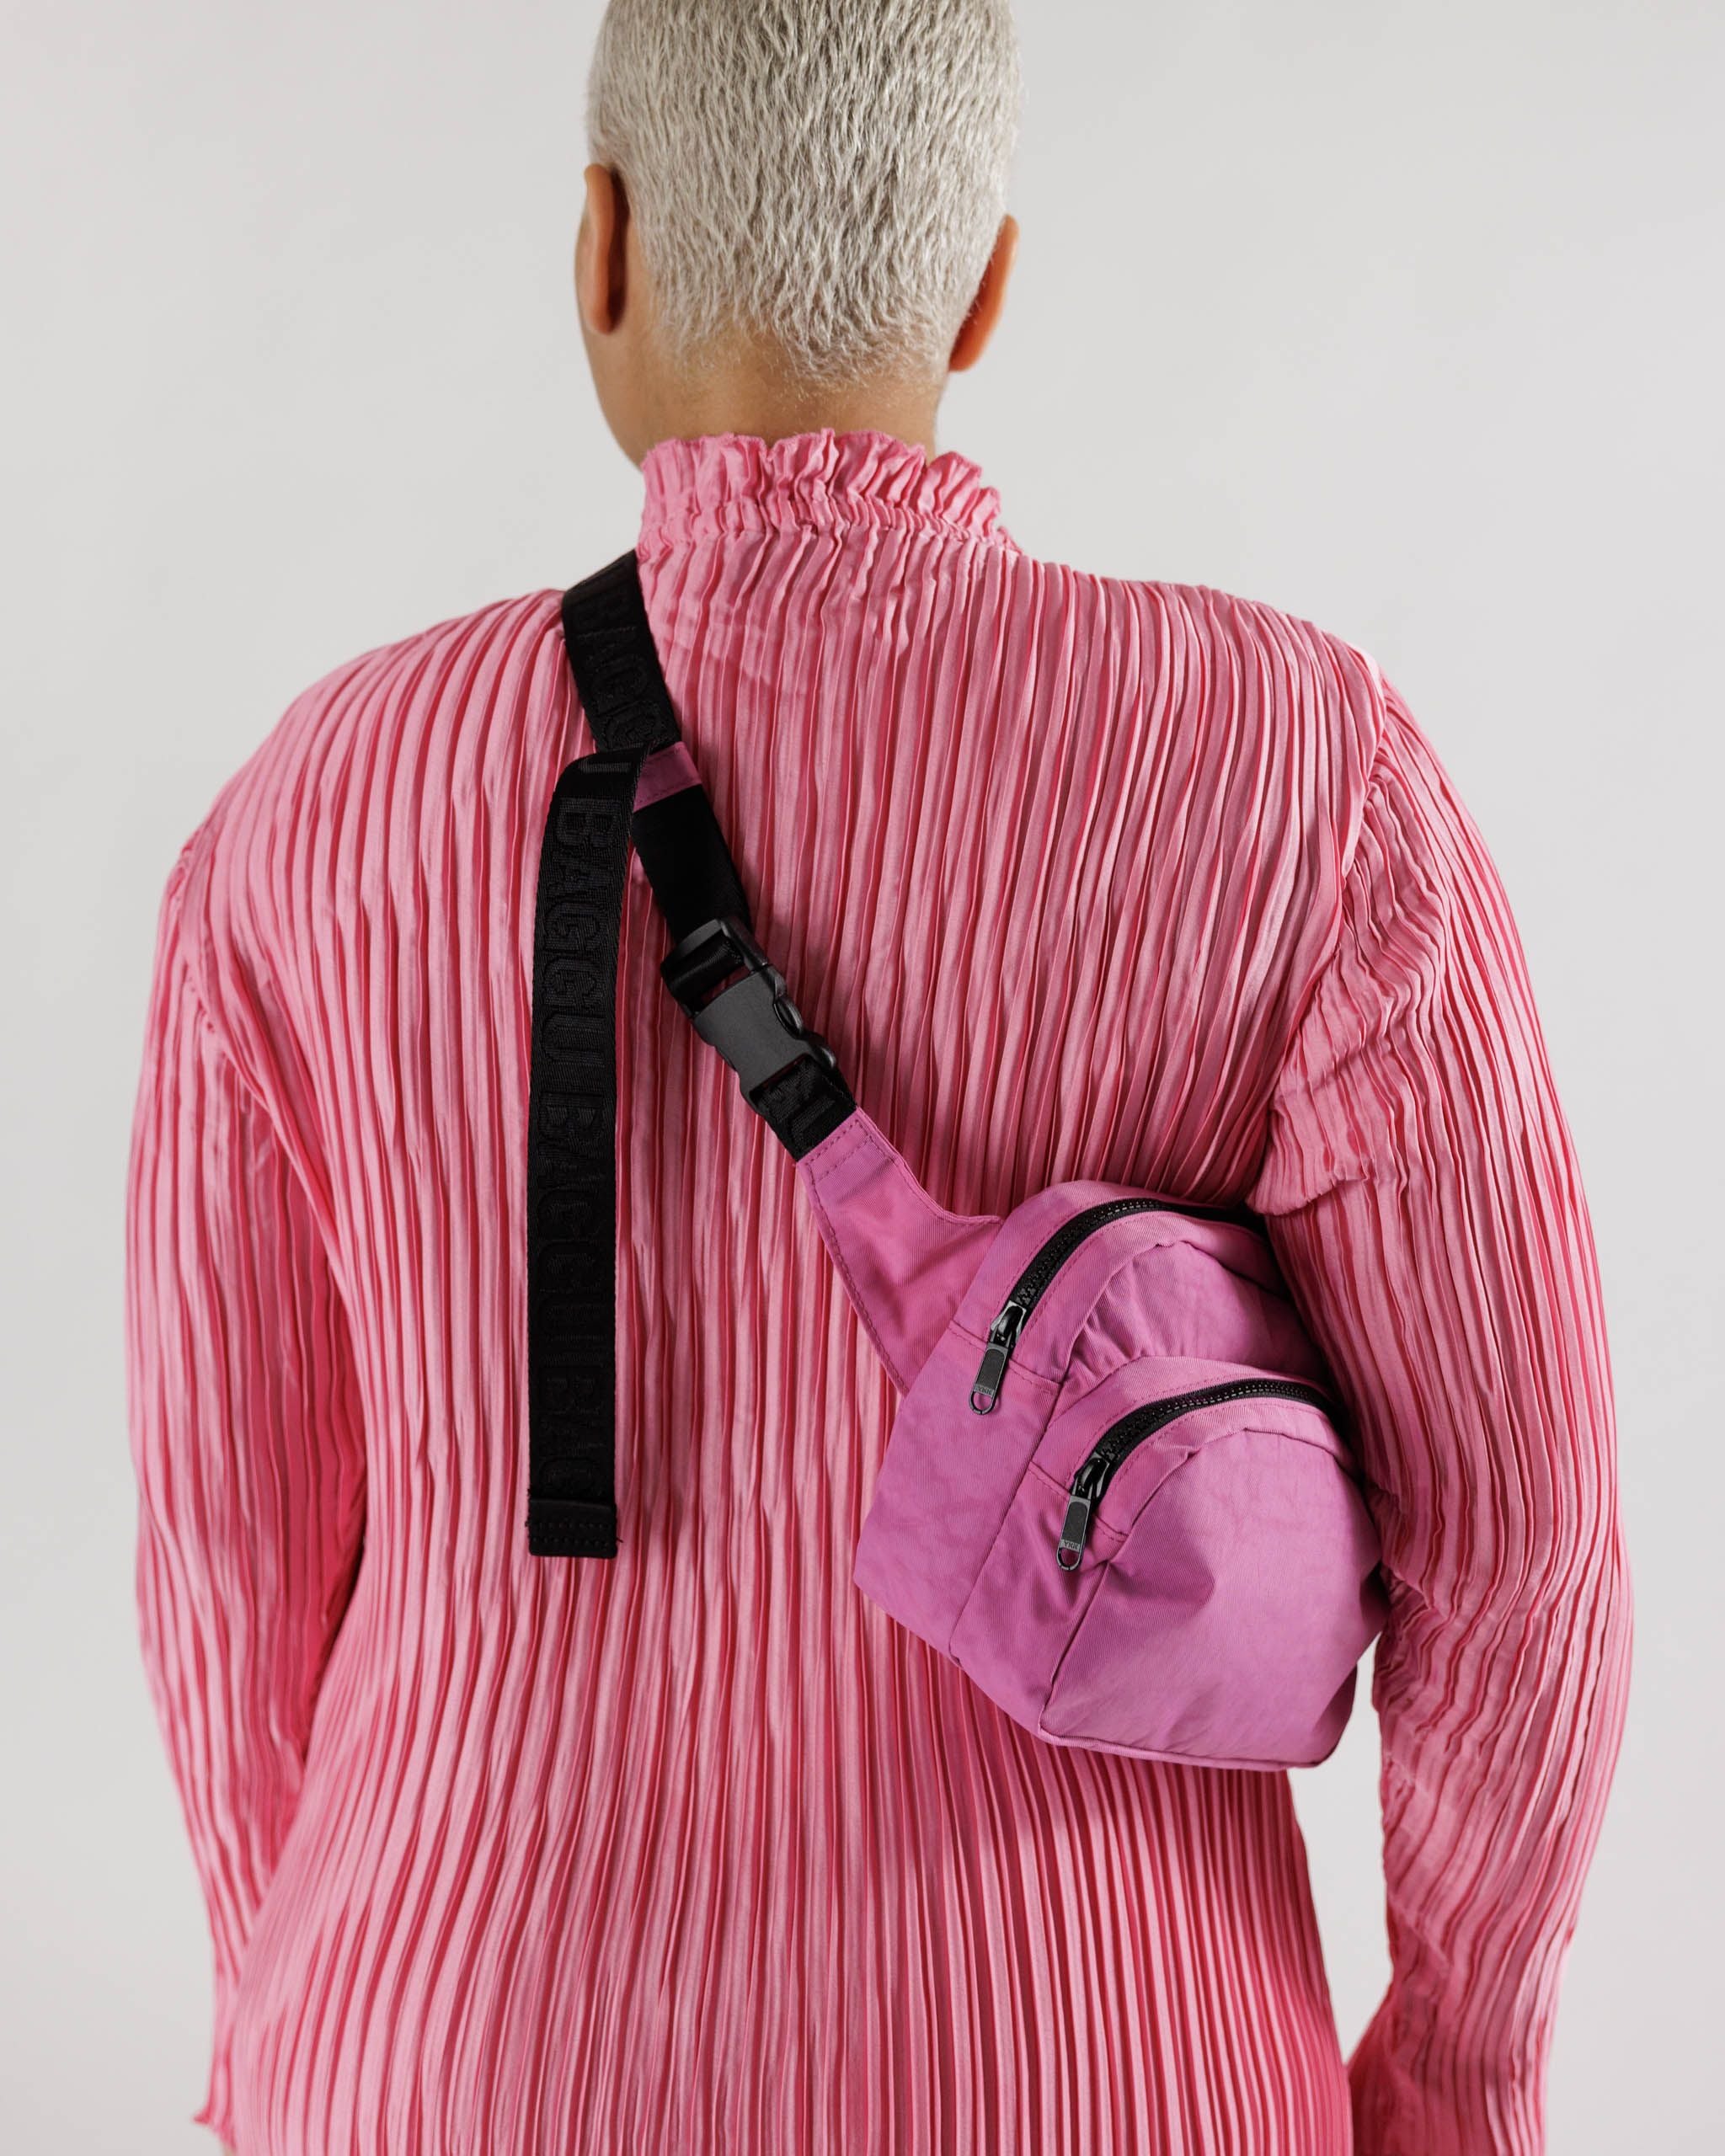 Pink Motion Fanny Pack by pahagh